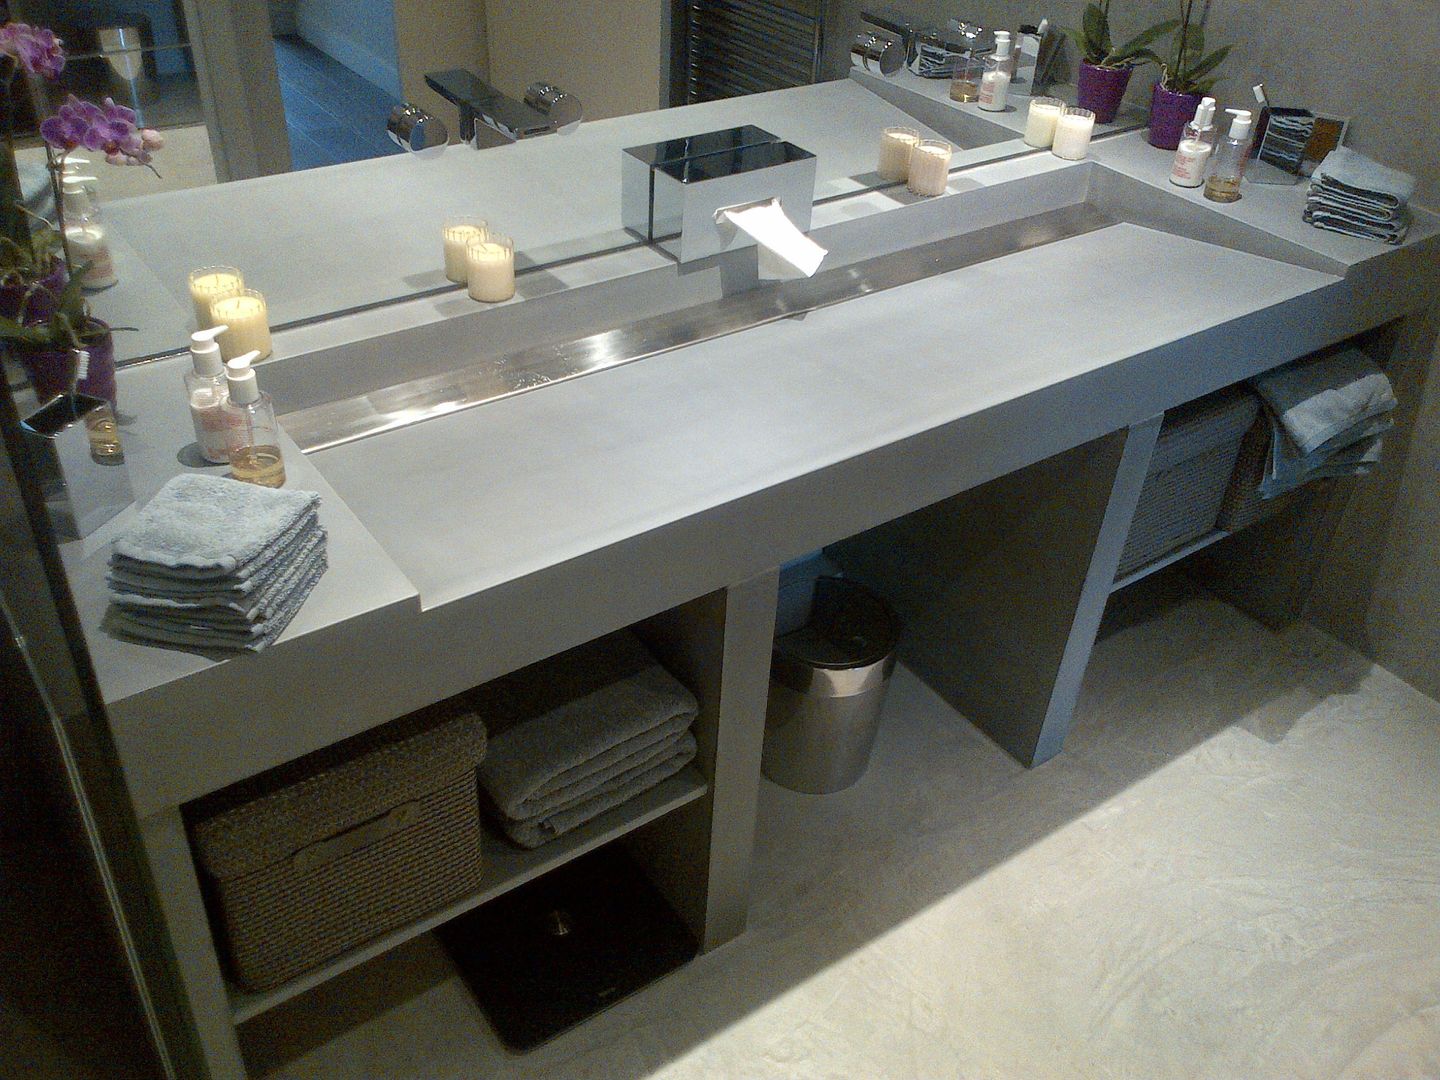 Concrete sinks & Brushed stainless steel Concrete LCDA Modern style bathrooms concrete sink,concrete bathroom,bespoke sink,bespoke bathroom